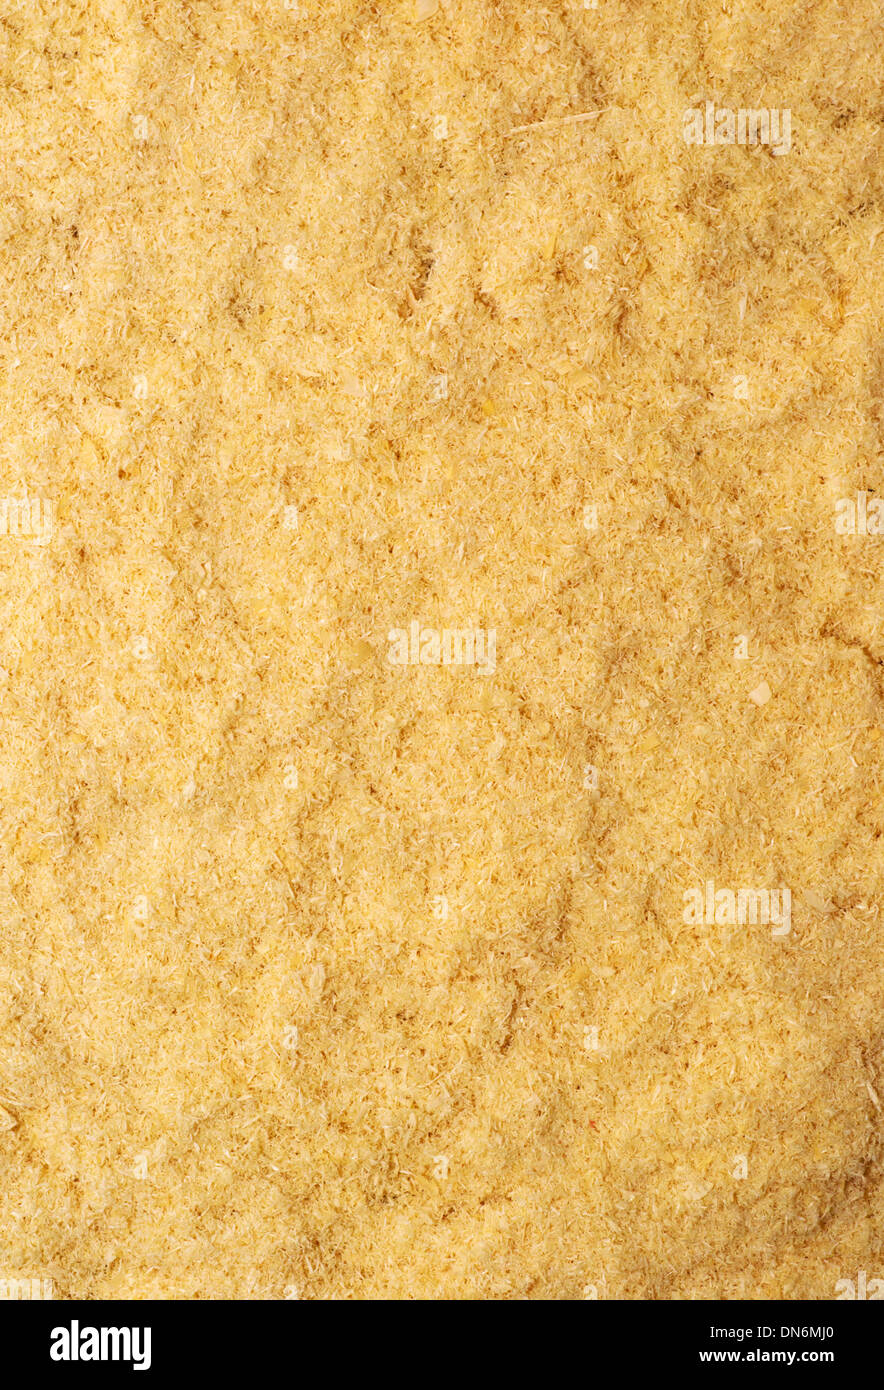 Sawdust texture of close up Stock Photo